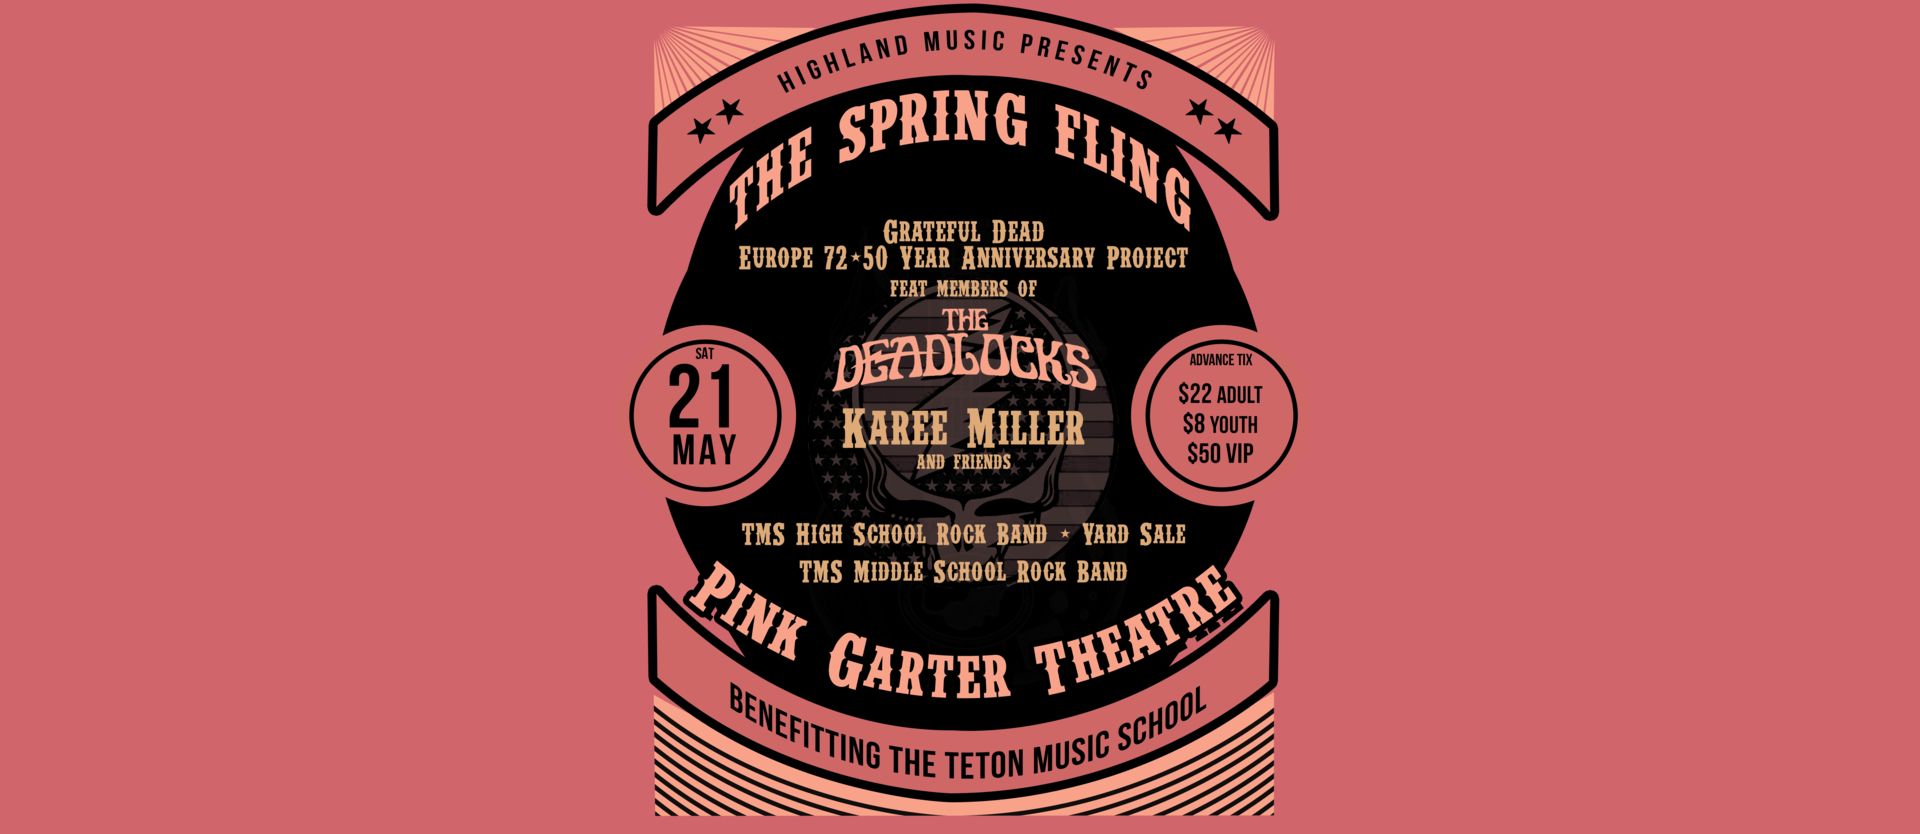 mbrs of The Deadlocks, Karee Miller and Friend, Teton Music School Rock Bands Spring Fling, Jackson, Wyoming, United States